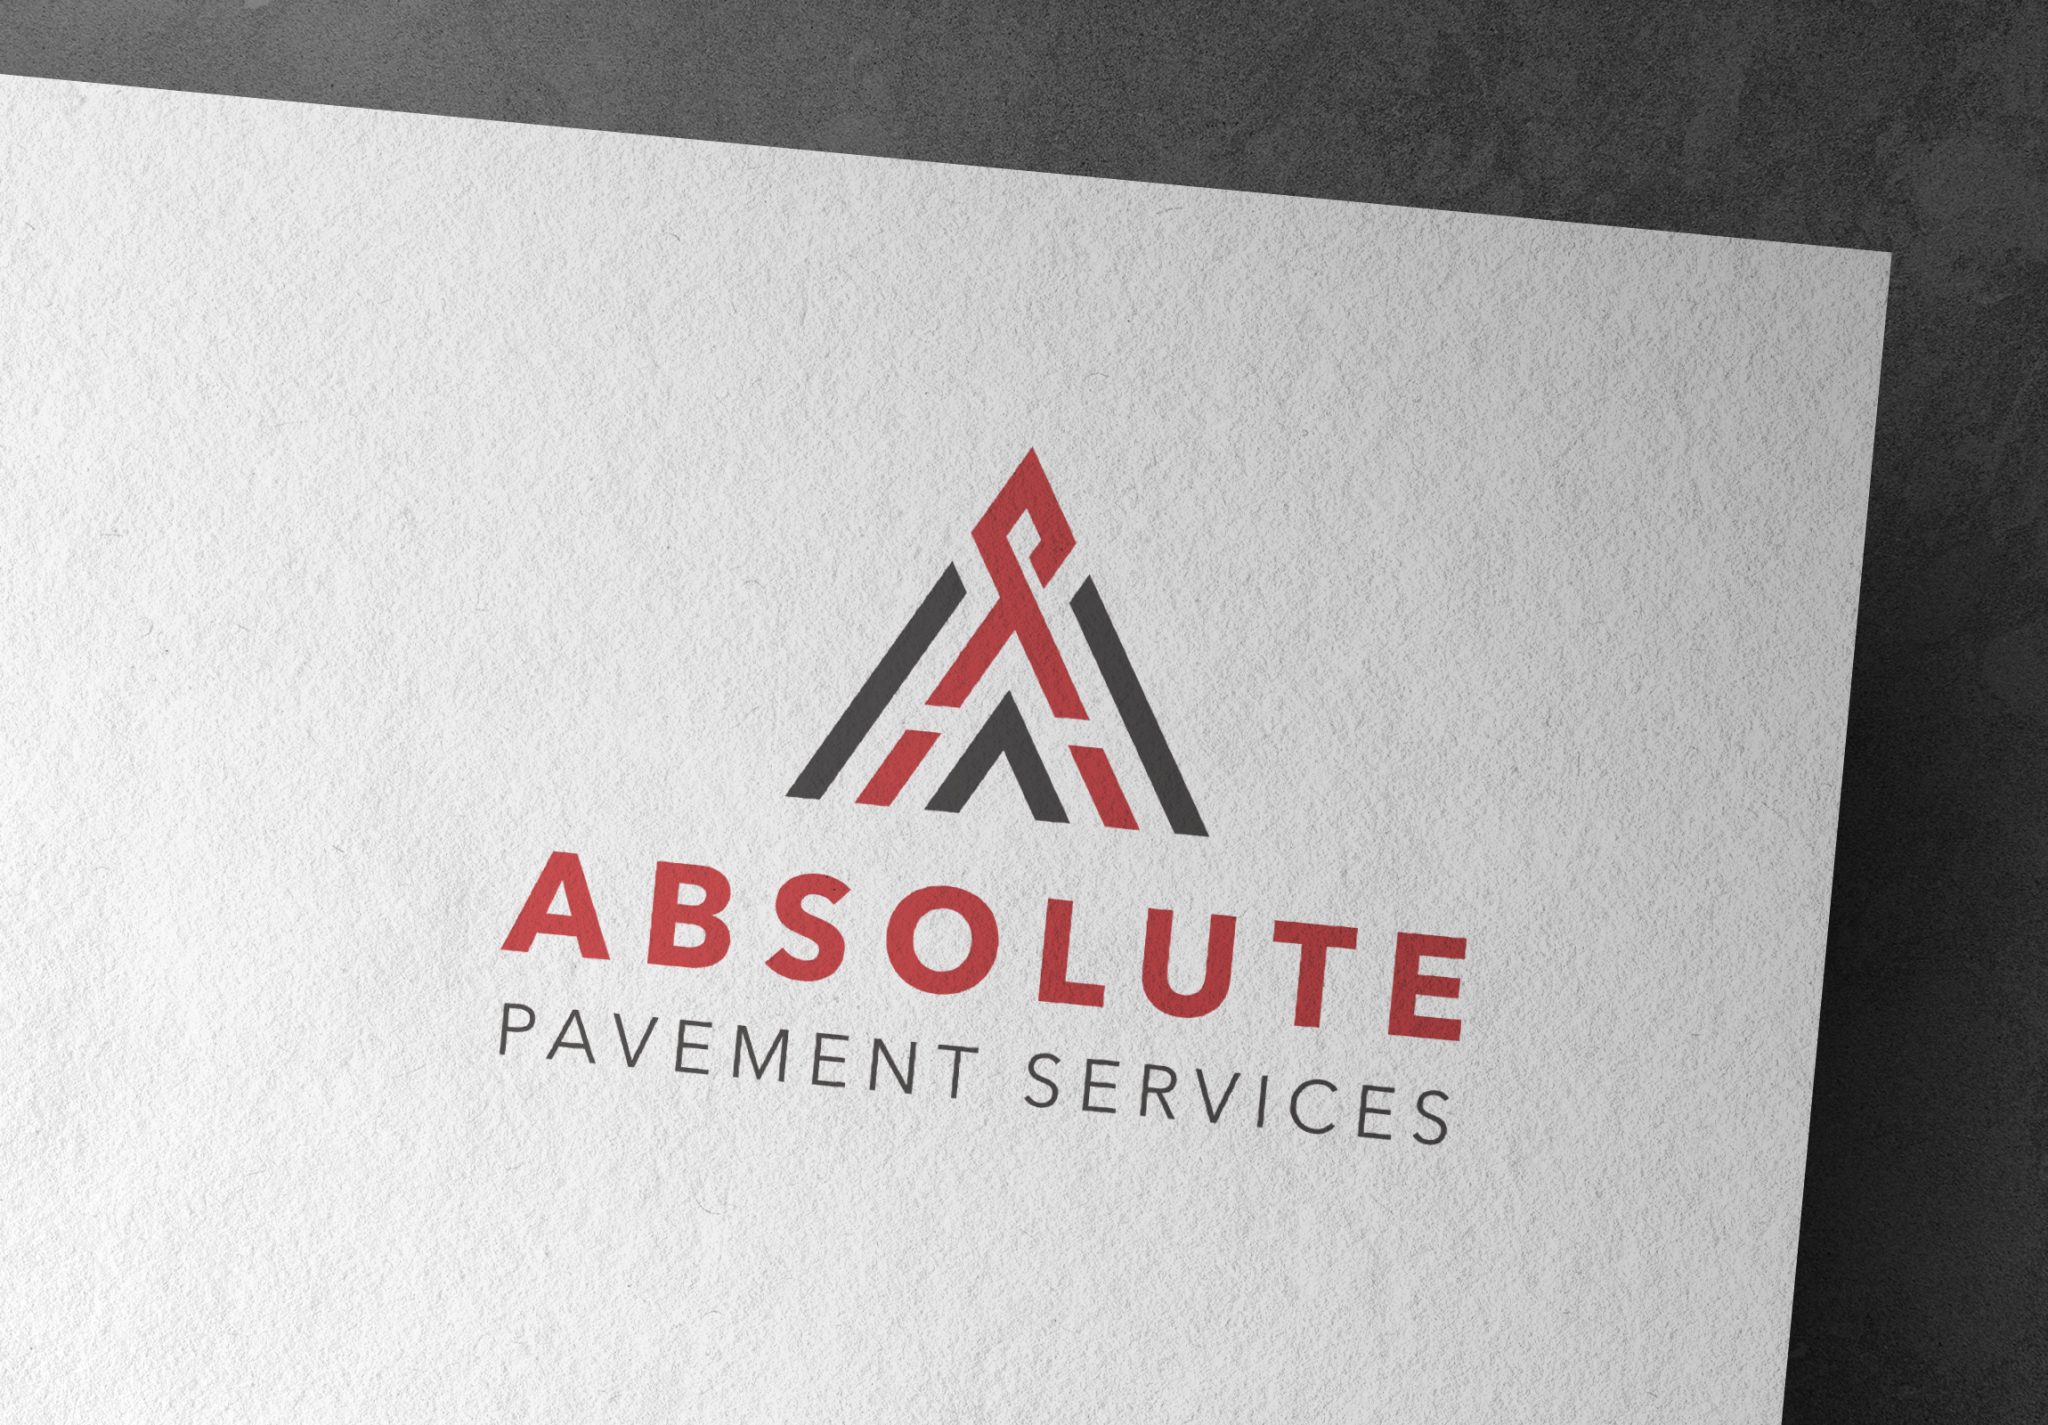 Absolute Pavement Services